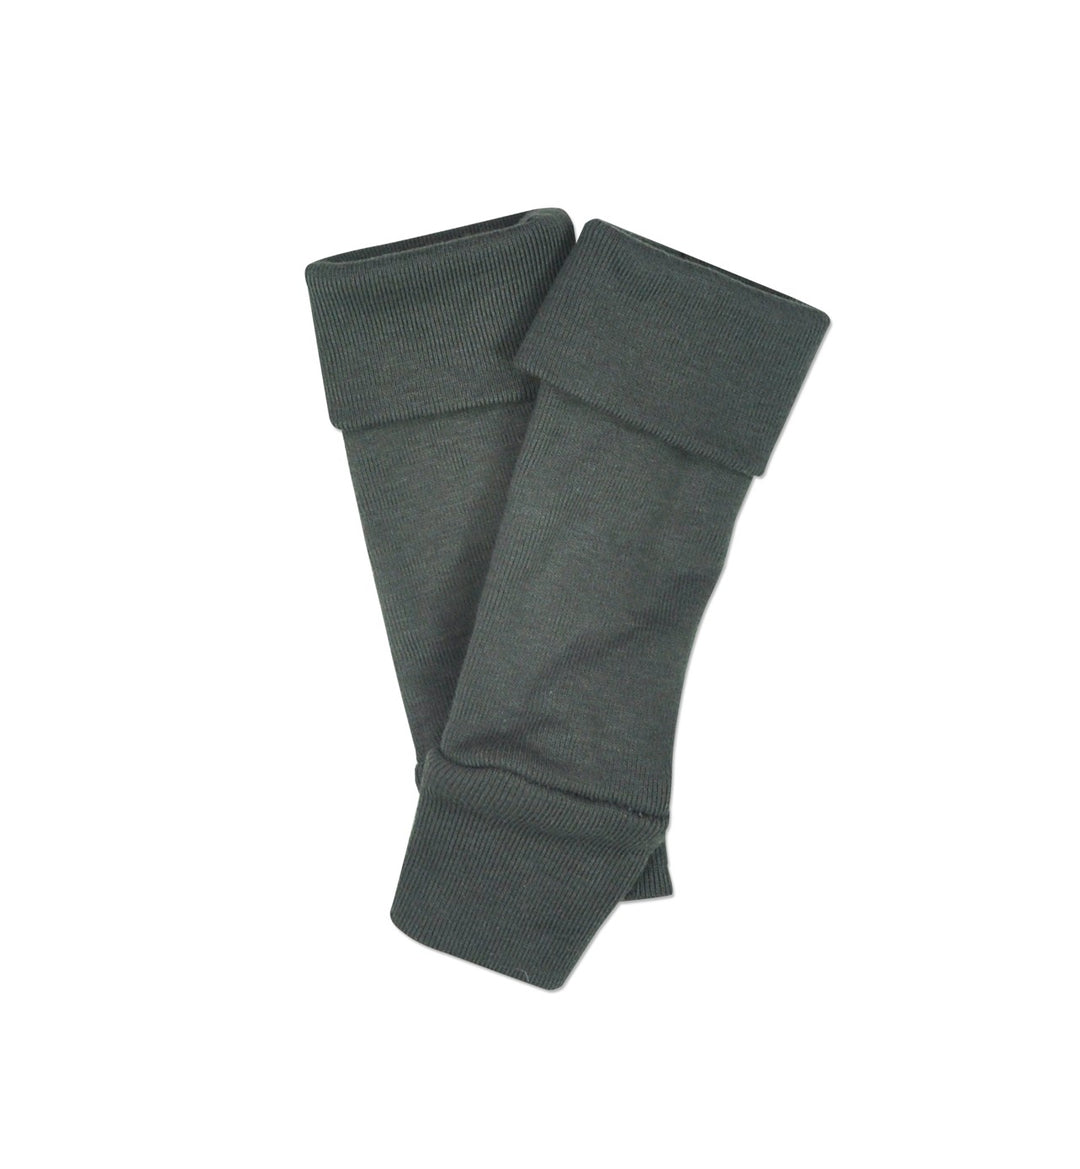 Solid Gray knit Leg/Arm Warmers